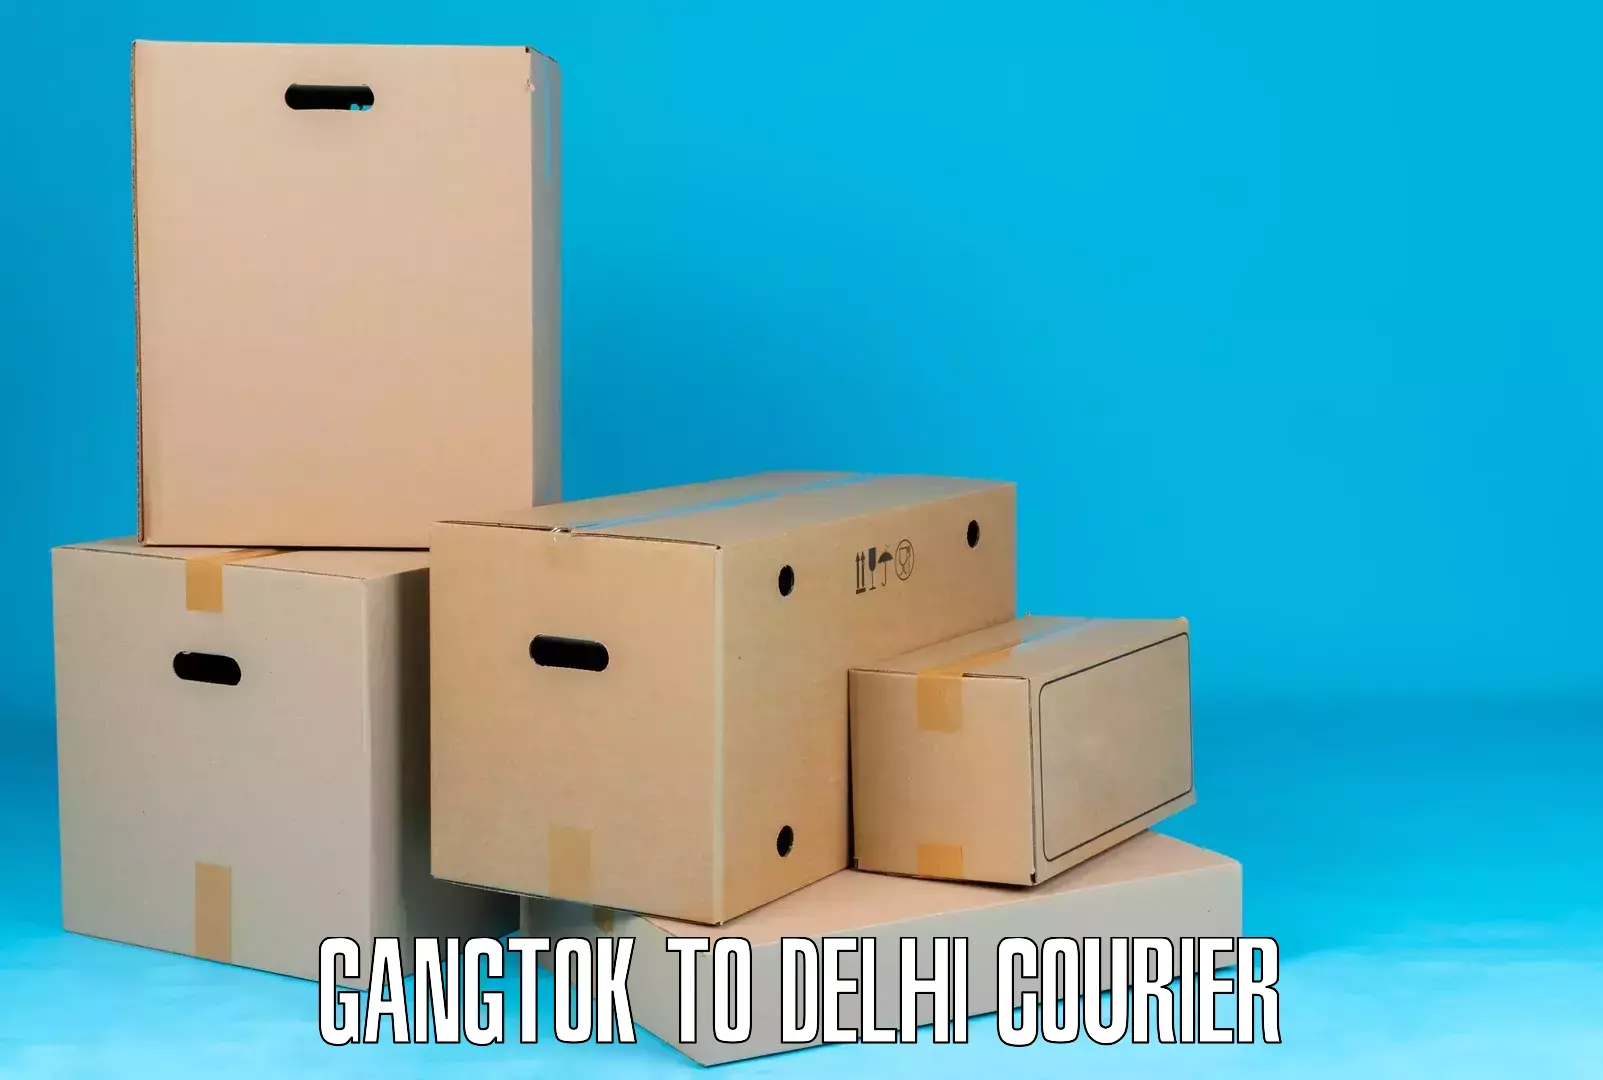 Efficient order fulfillment in Gangtok to NCR